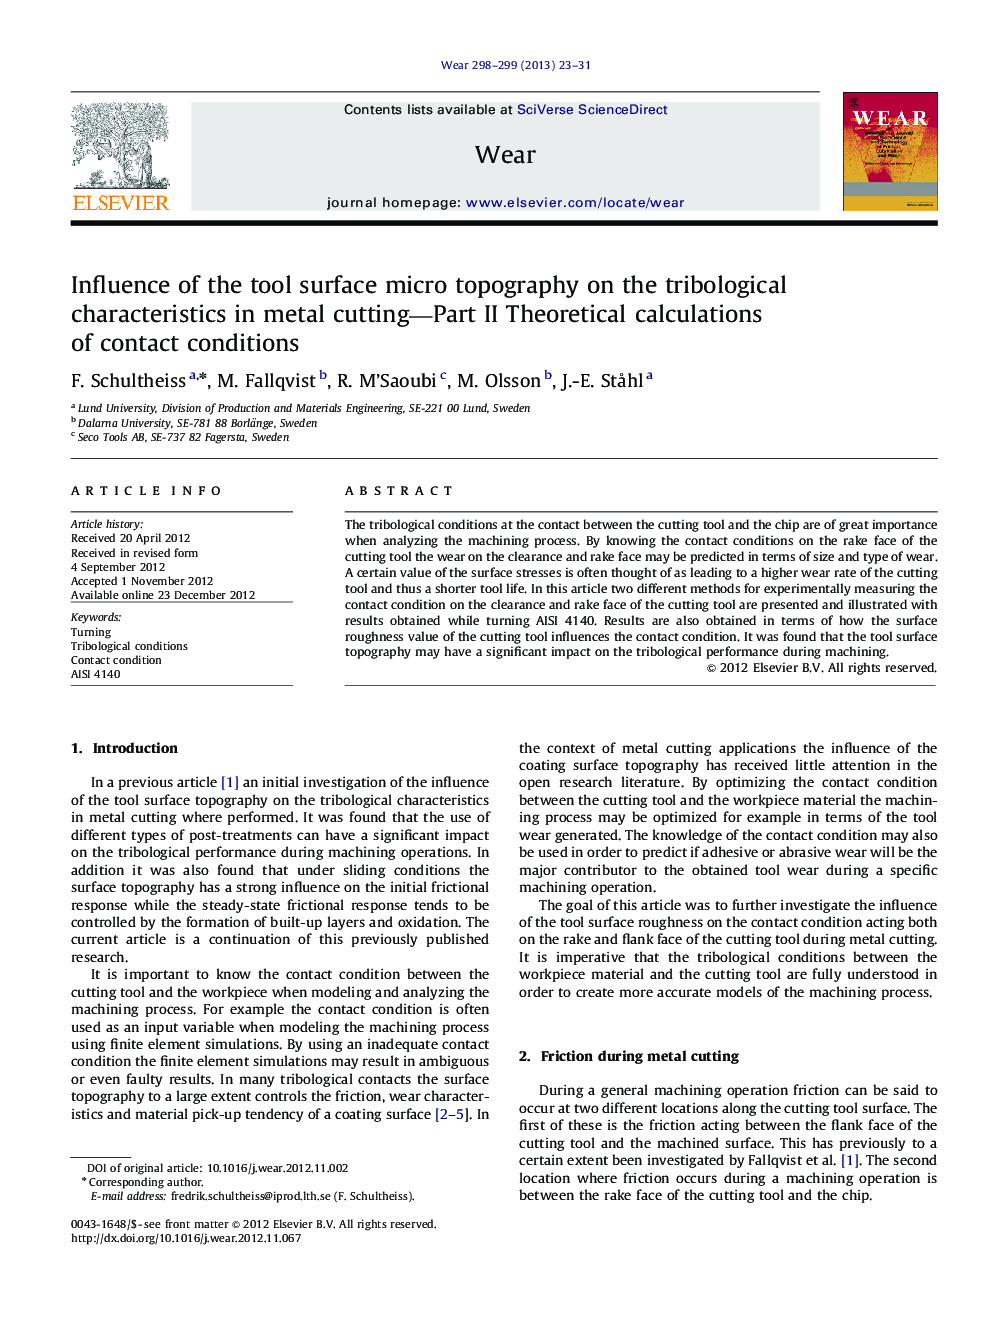 Influence of the tool surface micro topography on the tribological characteristics in metal cutting—Part II Theoretical calculations of contact conditions